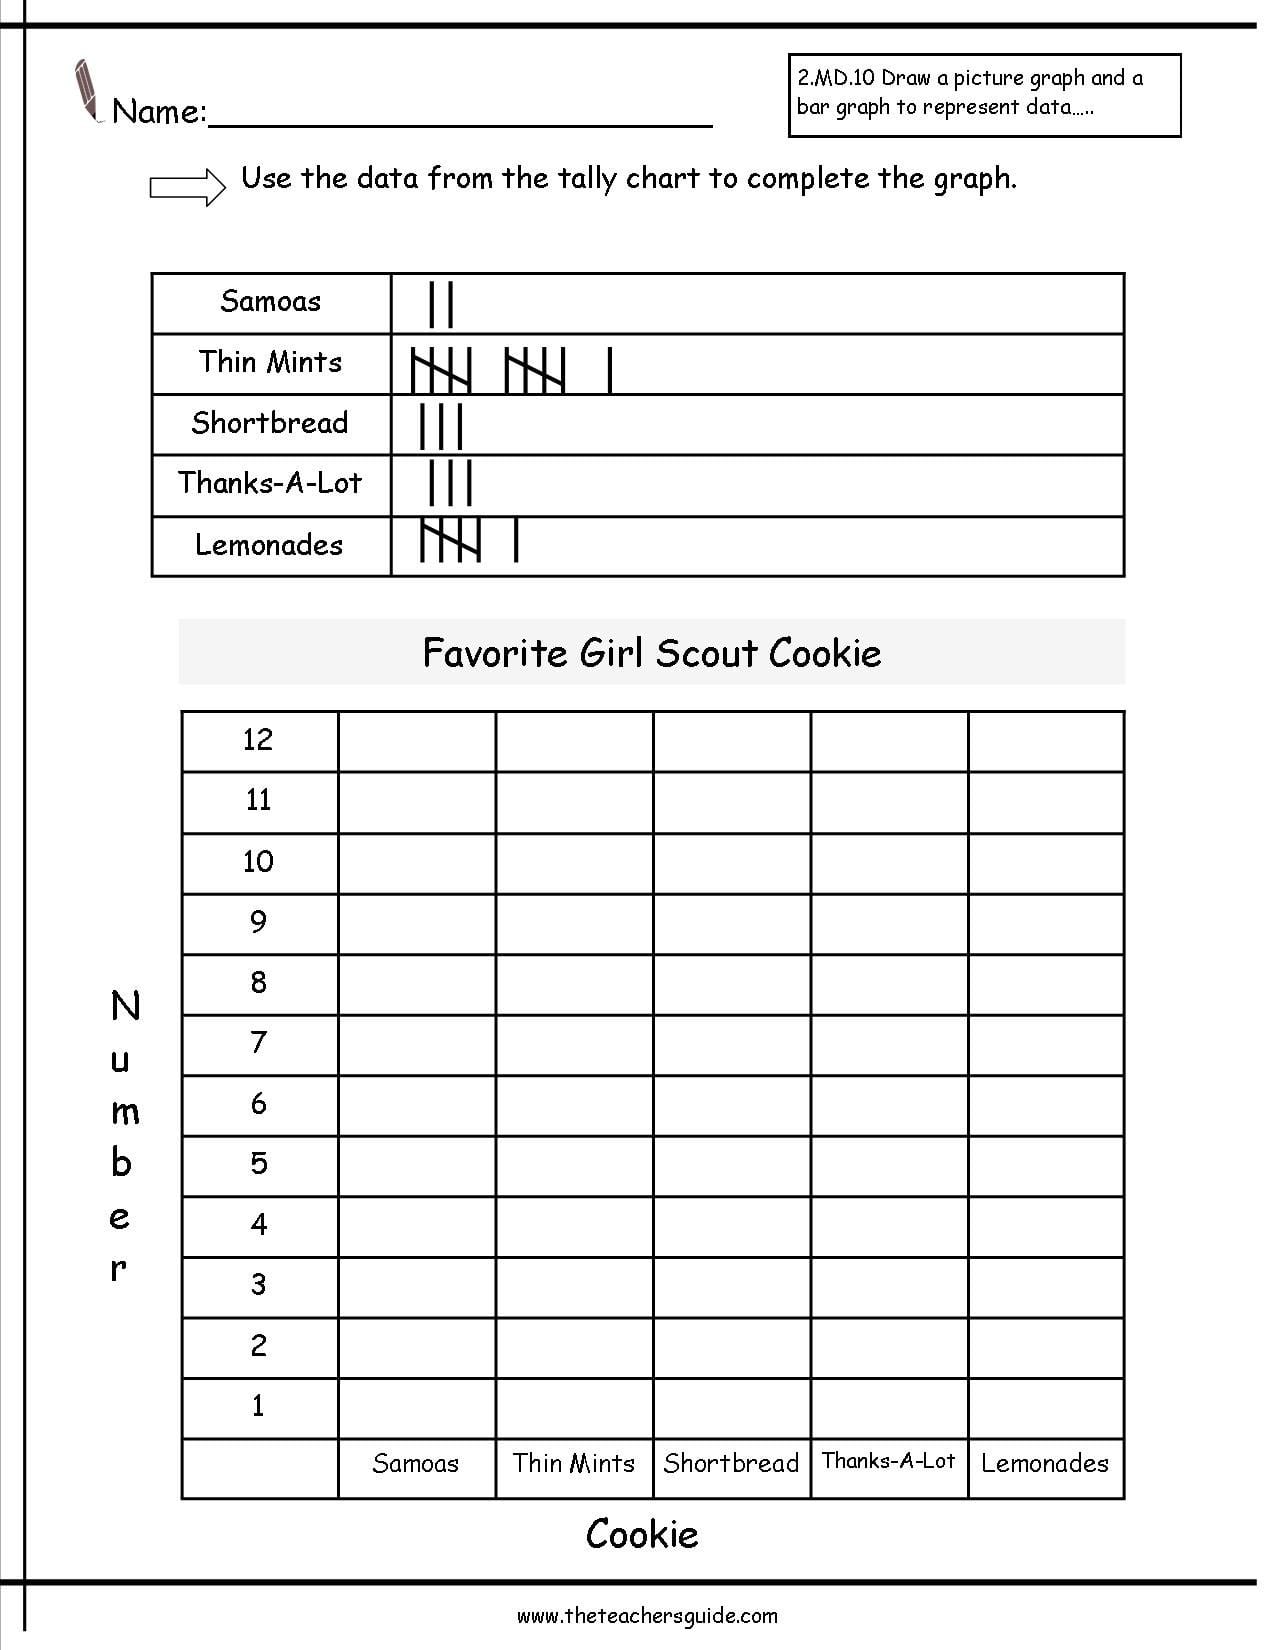 Reading And Creating Bar Graphs Worksheets From The Teacher's Guide Together With Charts And Graphs Worksheets